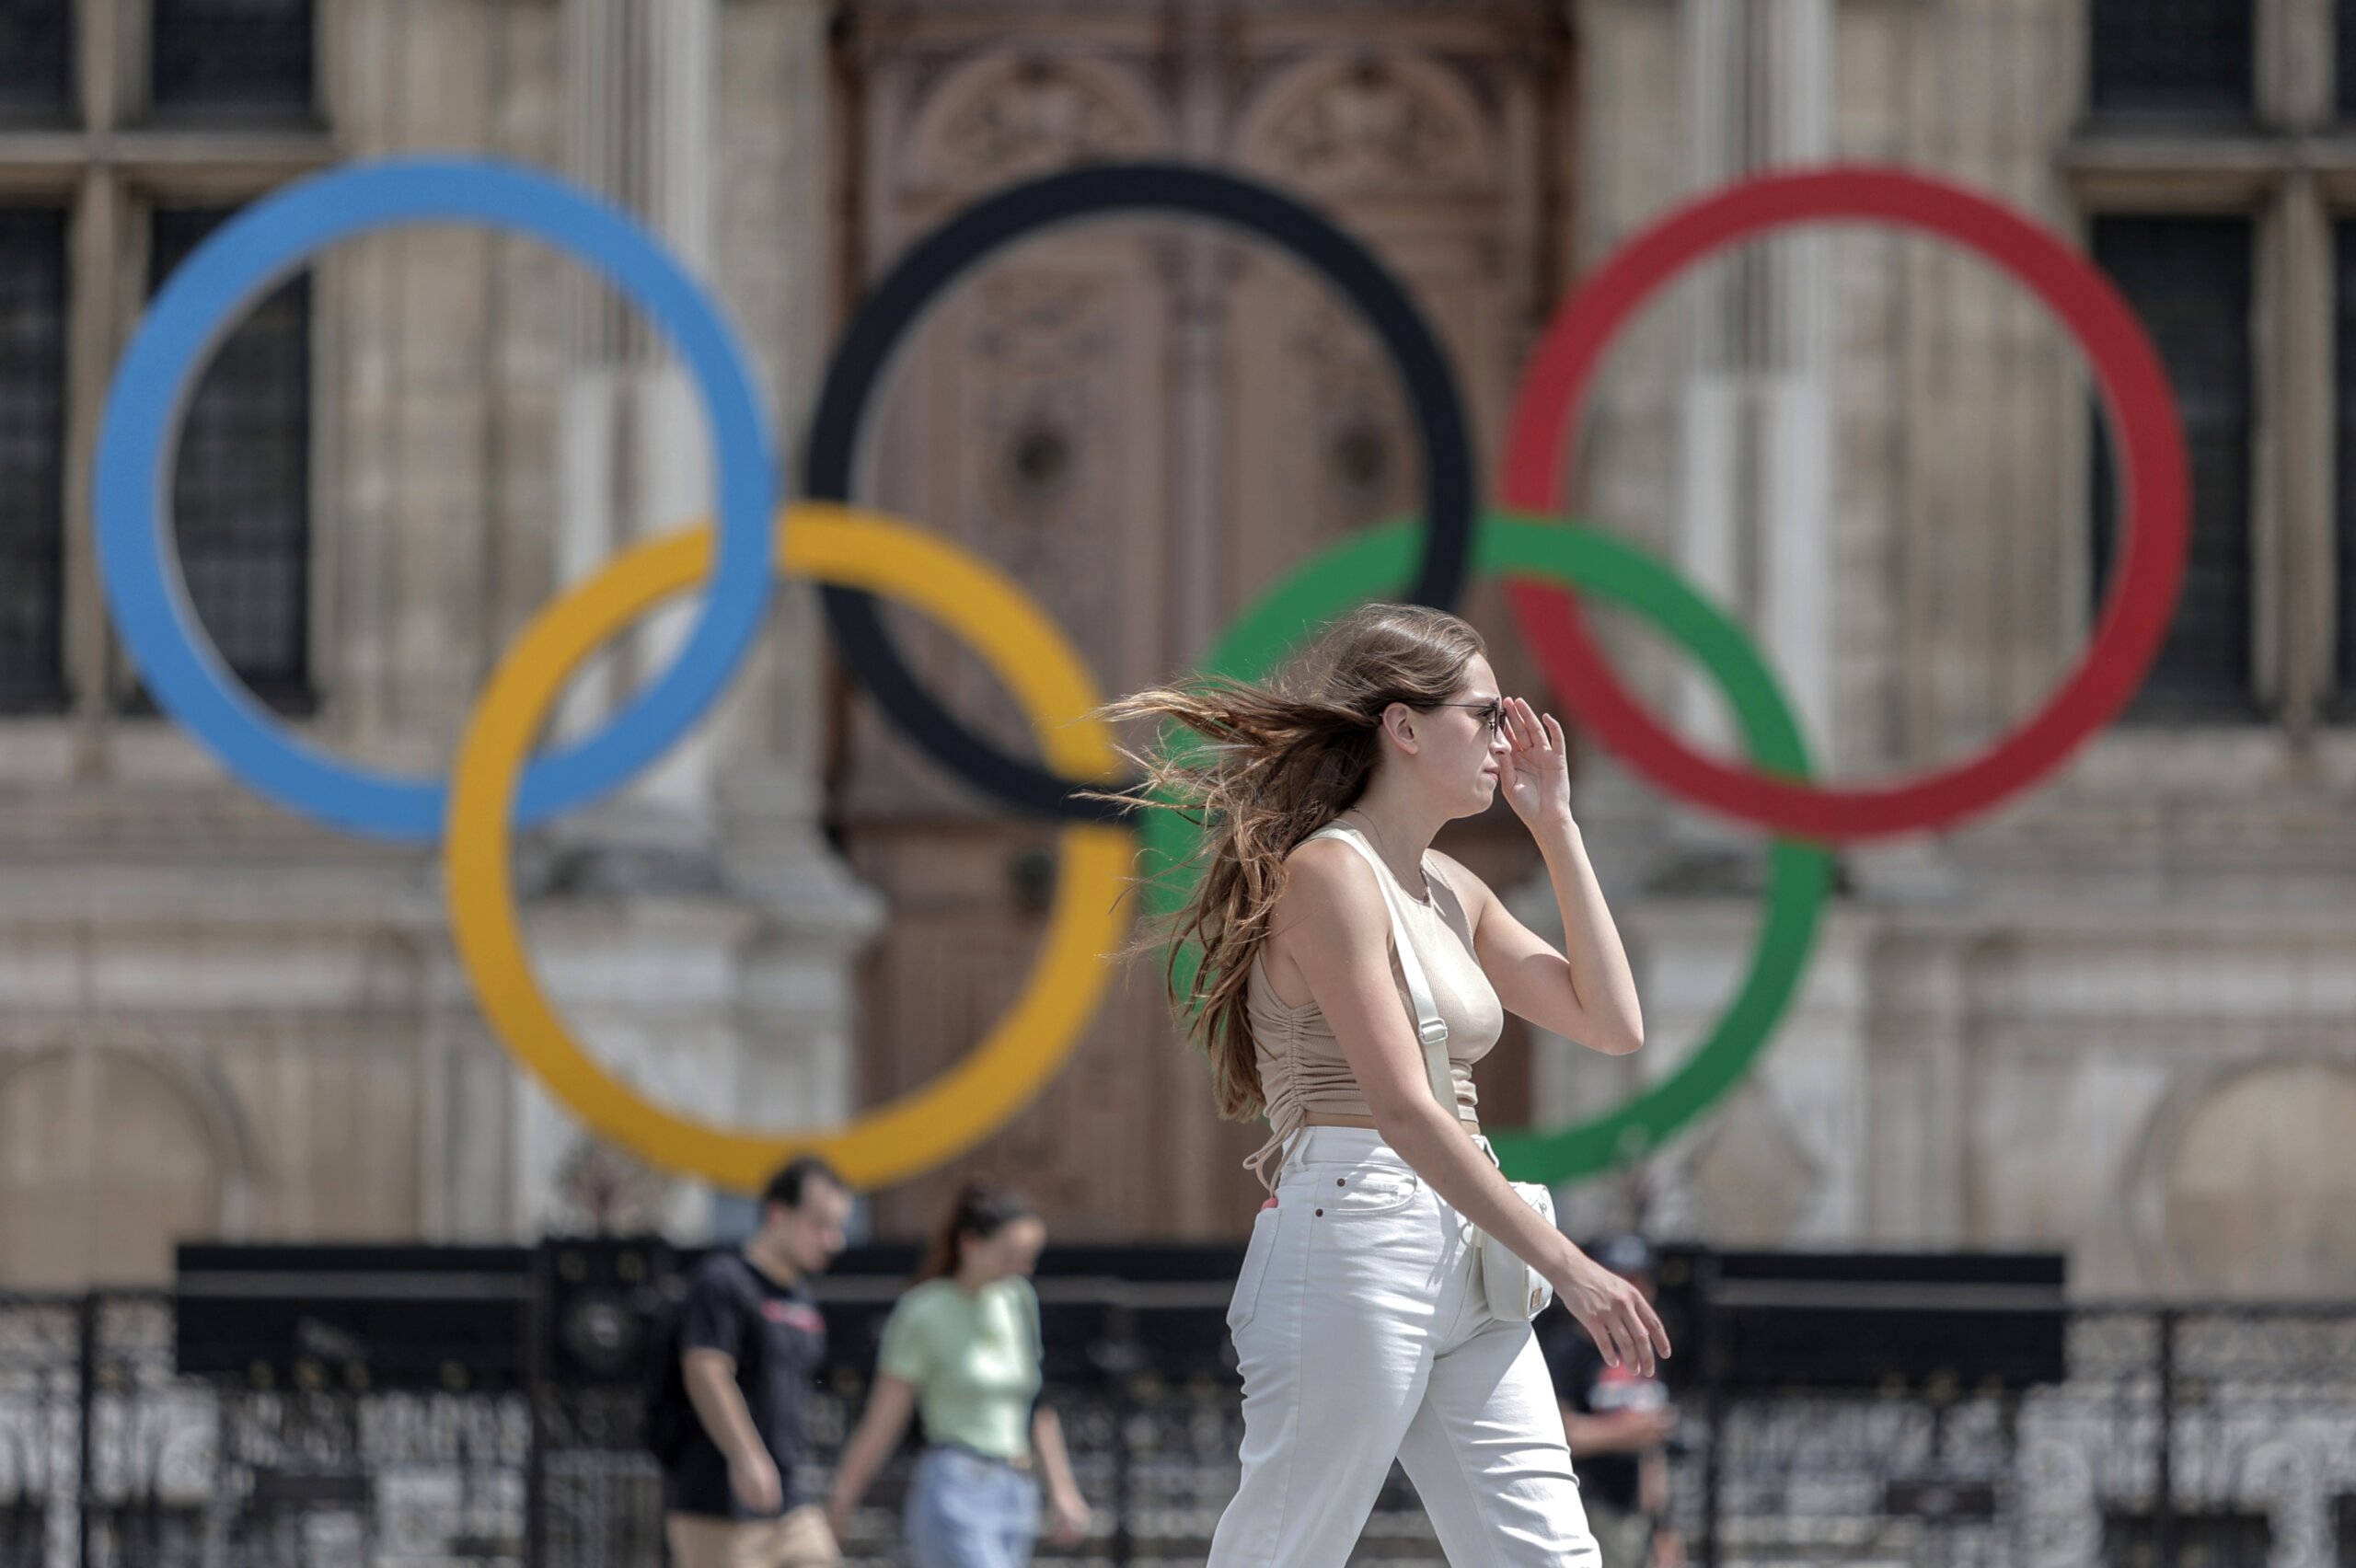 Ukraine steps up efforts to exclude Russia from Olympics